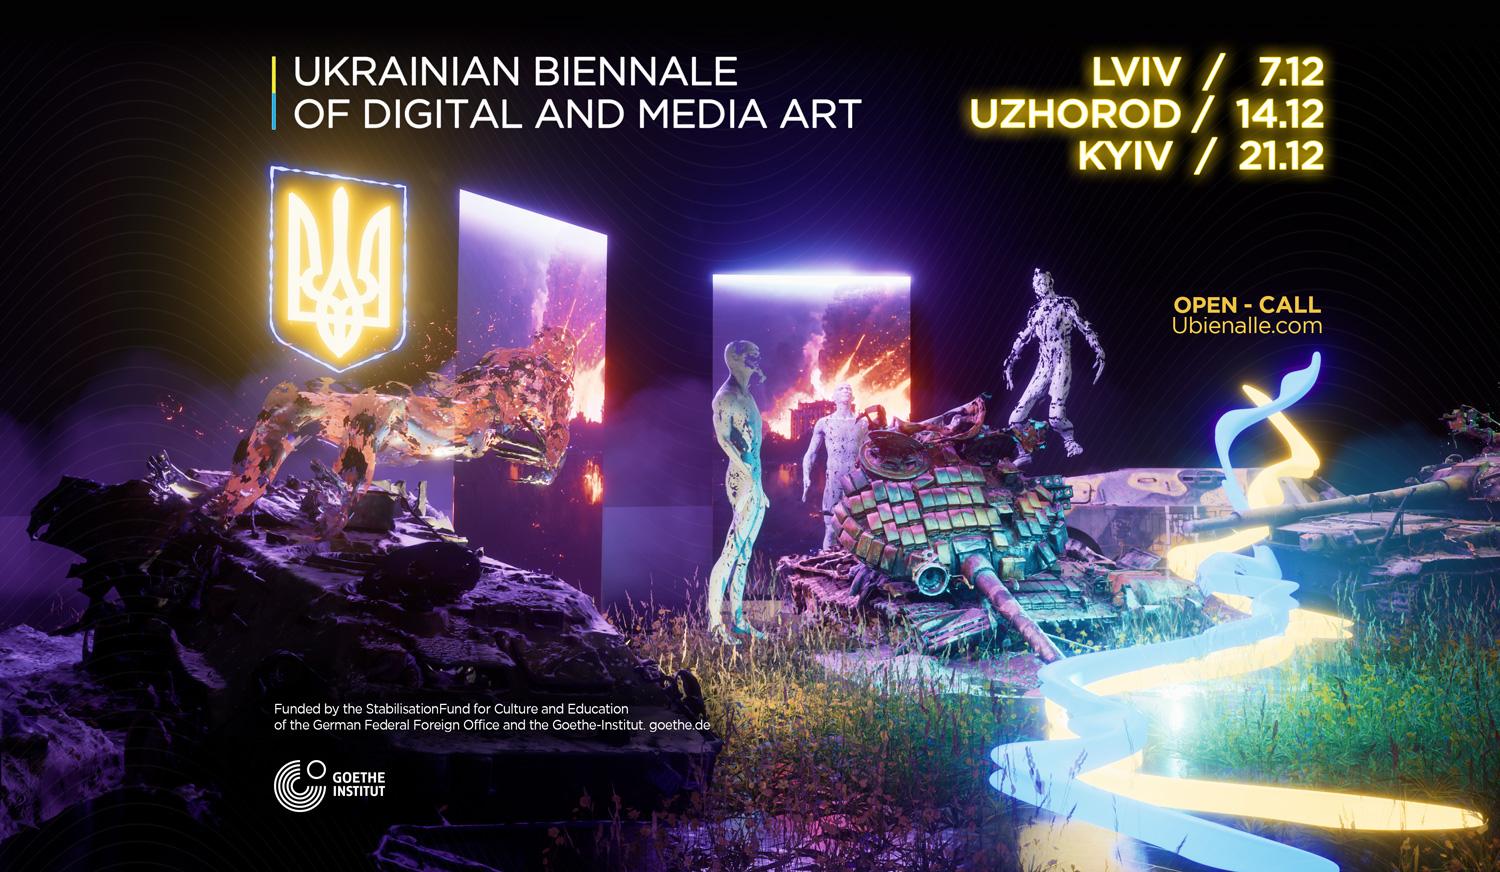 The Biennale of Digital and Media Art presents exhibitions with artists from Ukraine, Spain, Germany, France, Poland, Slovenia and Czech Republic